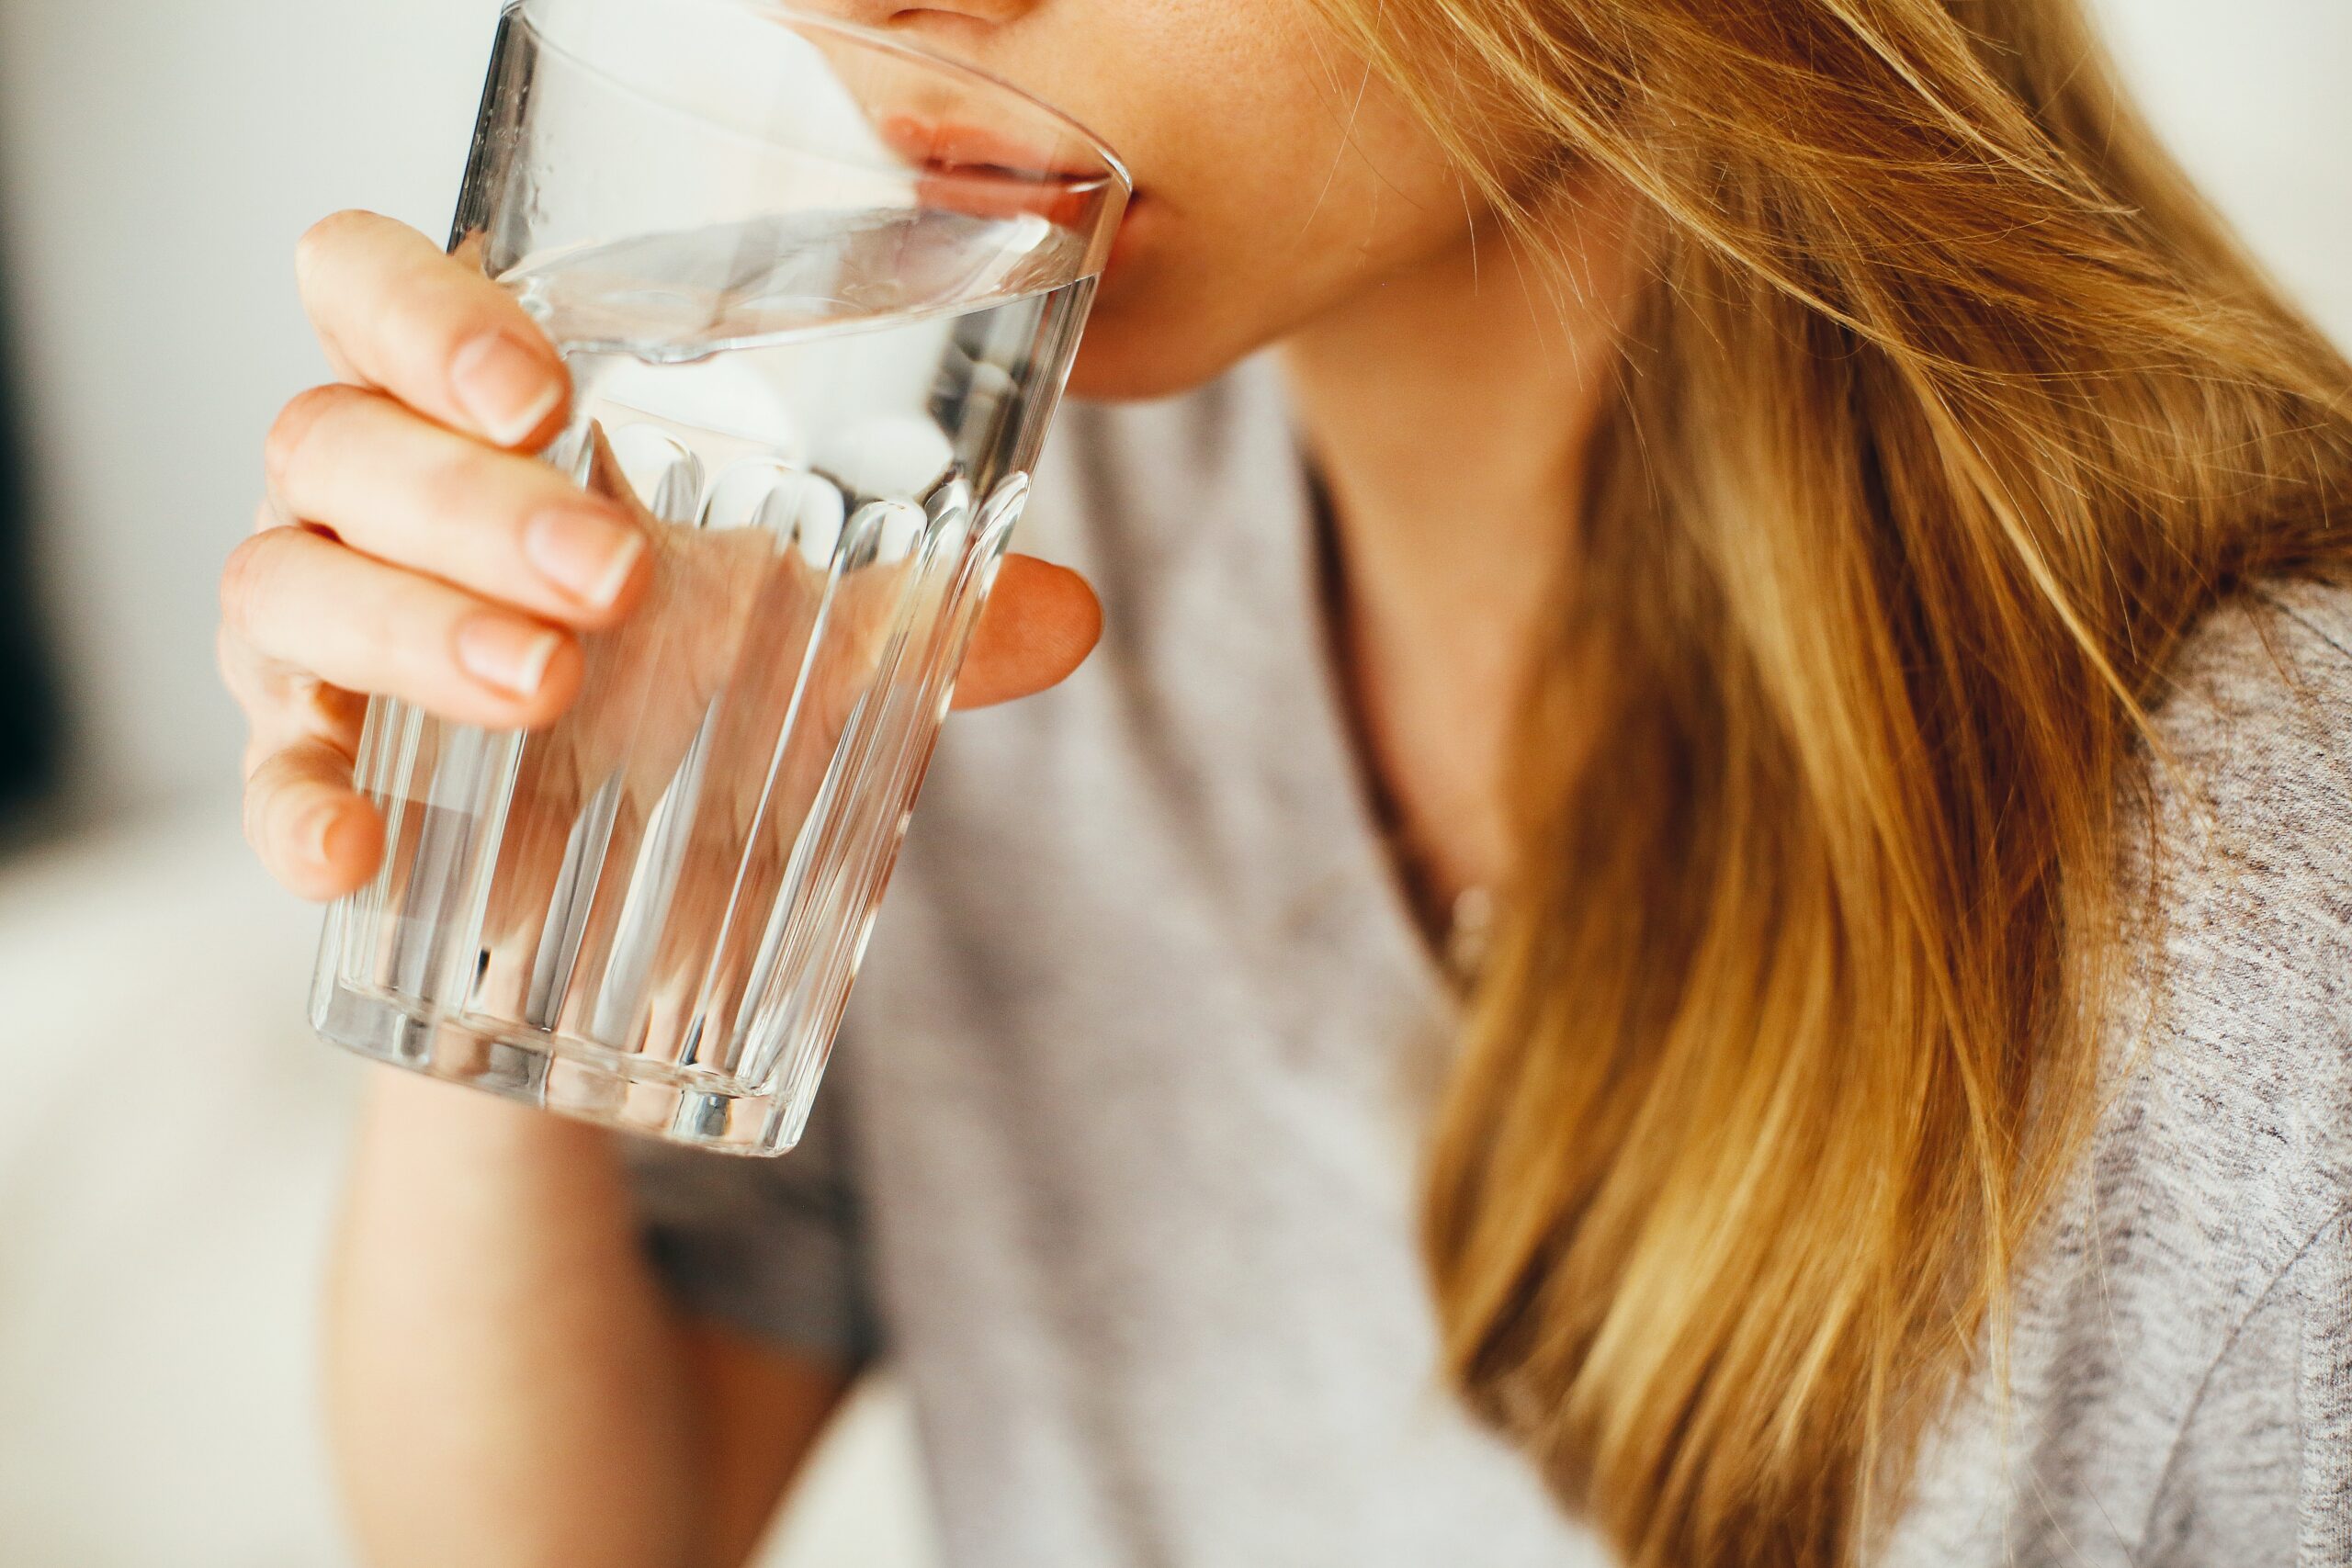 woman drinking a glass of water with a v-neck light gray t-shirt on.